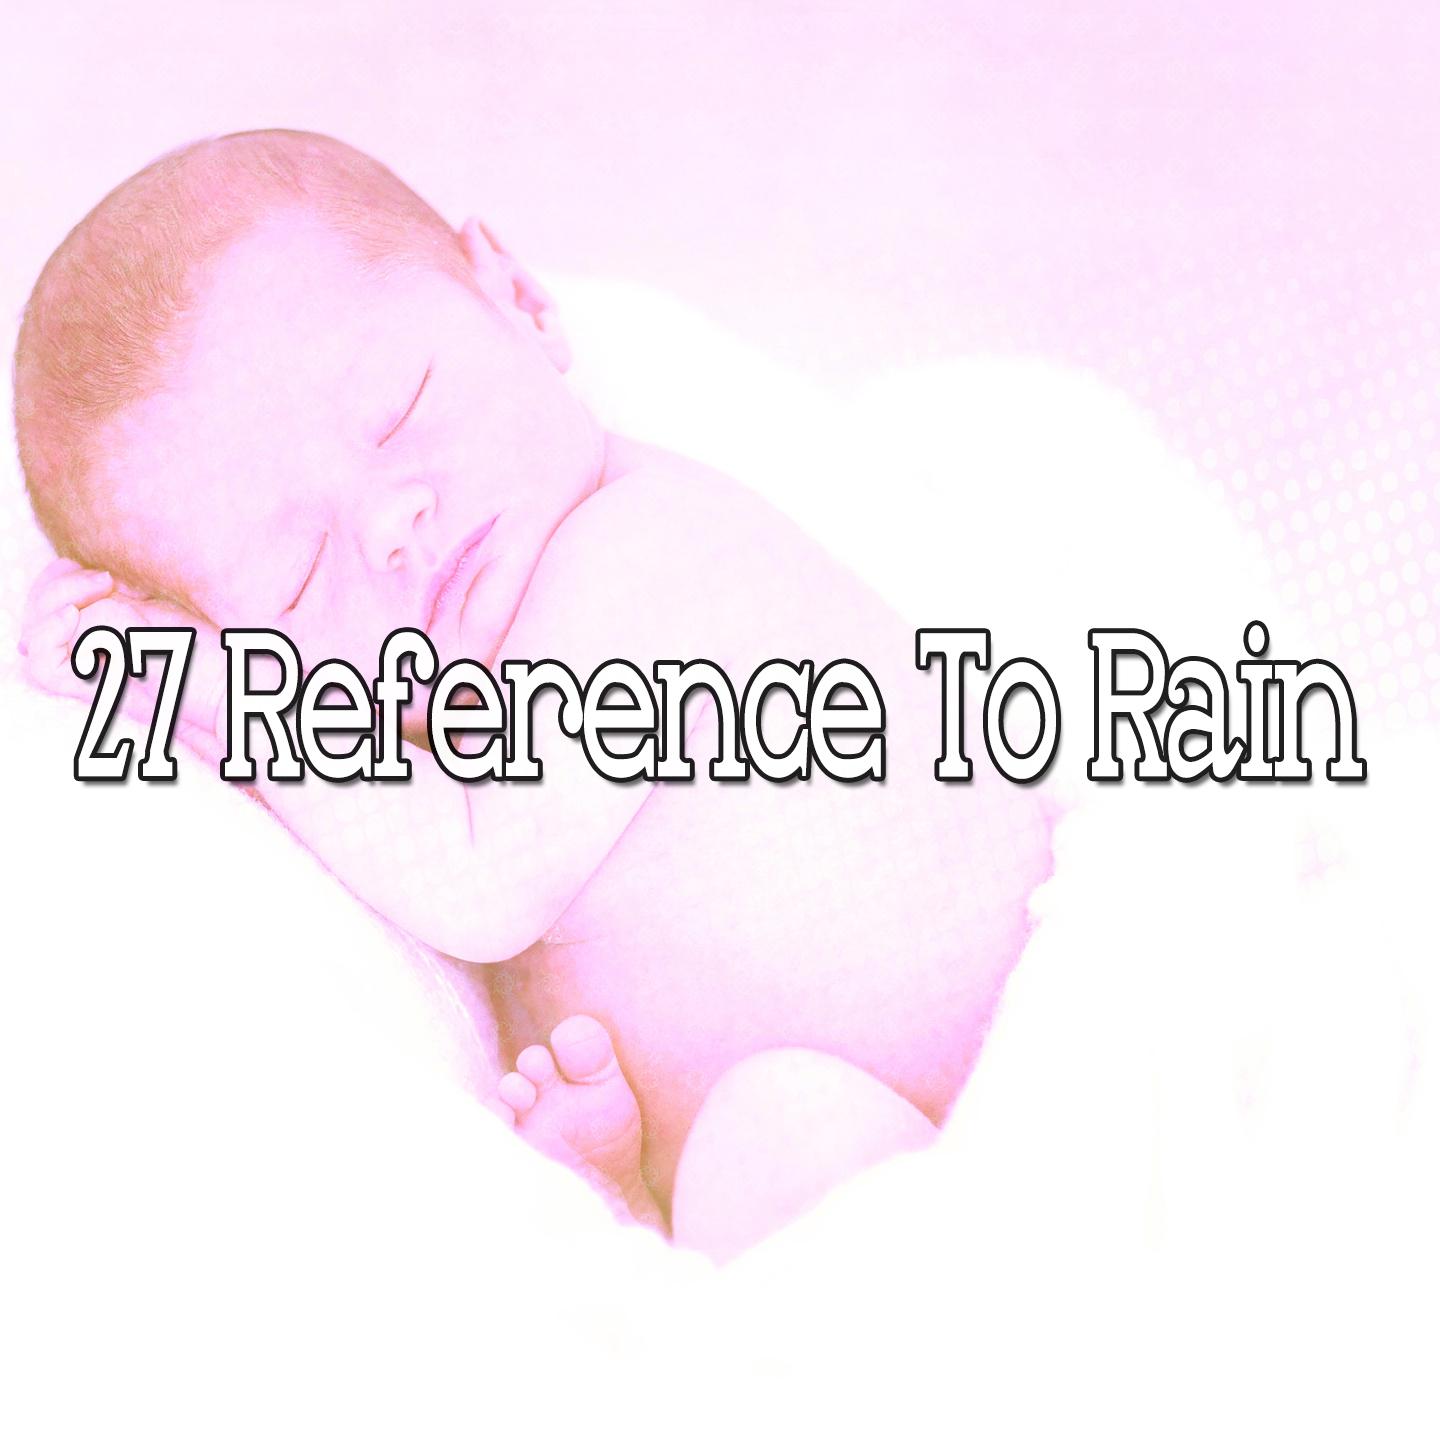 27 Reference to Rain